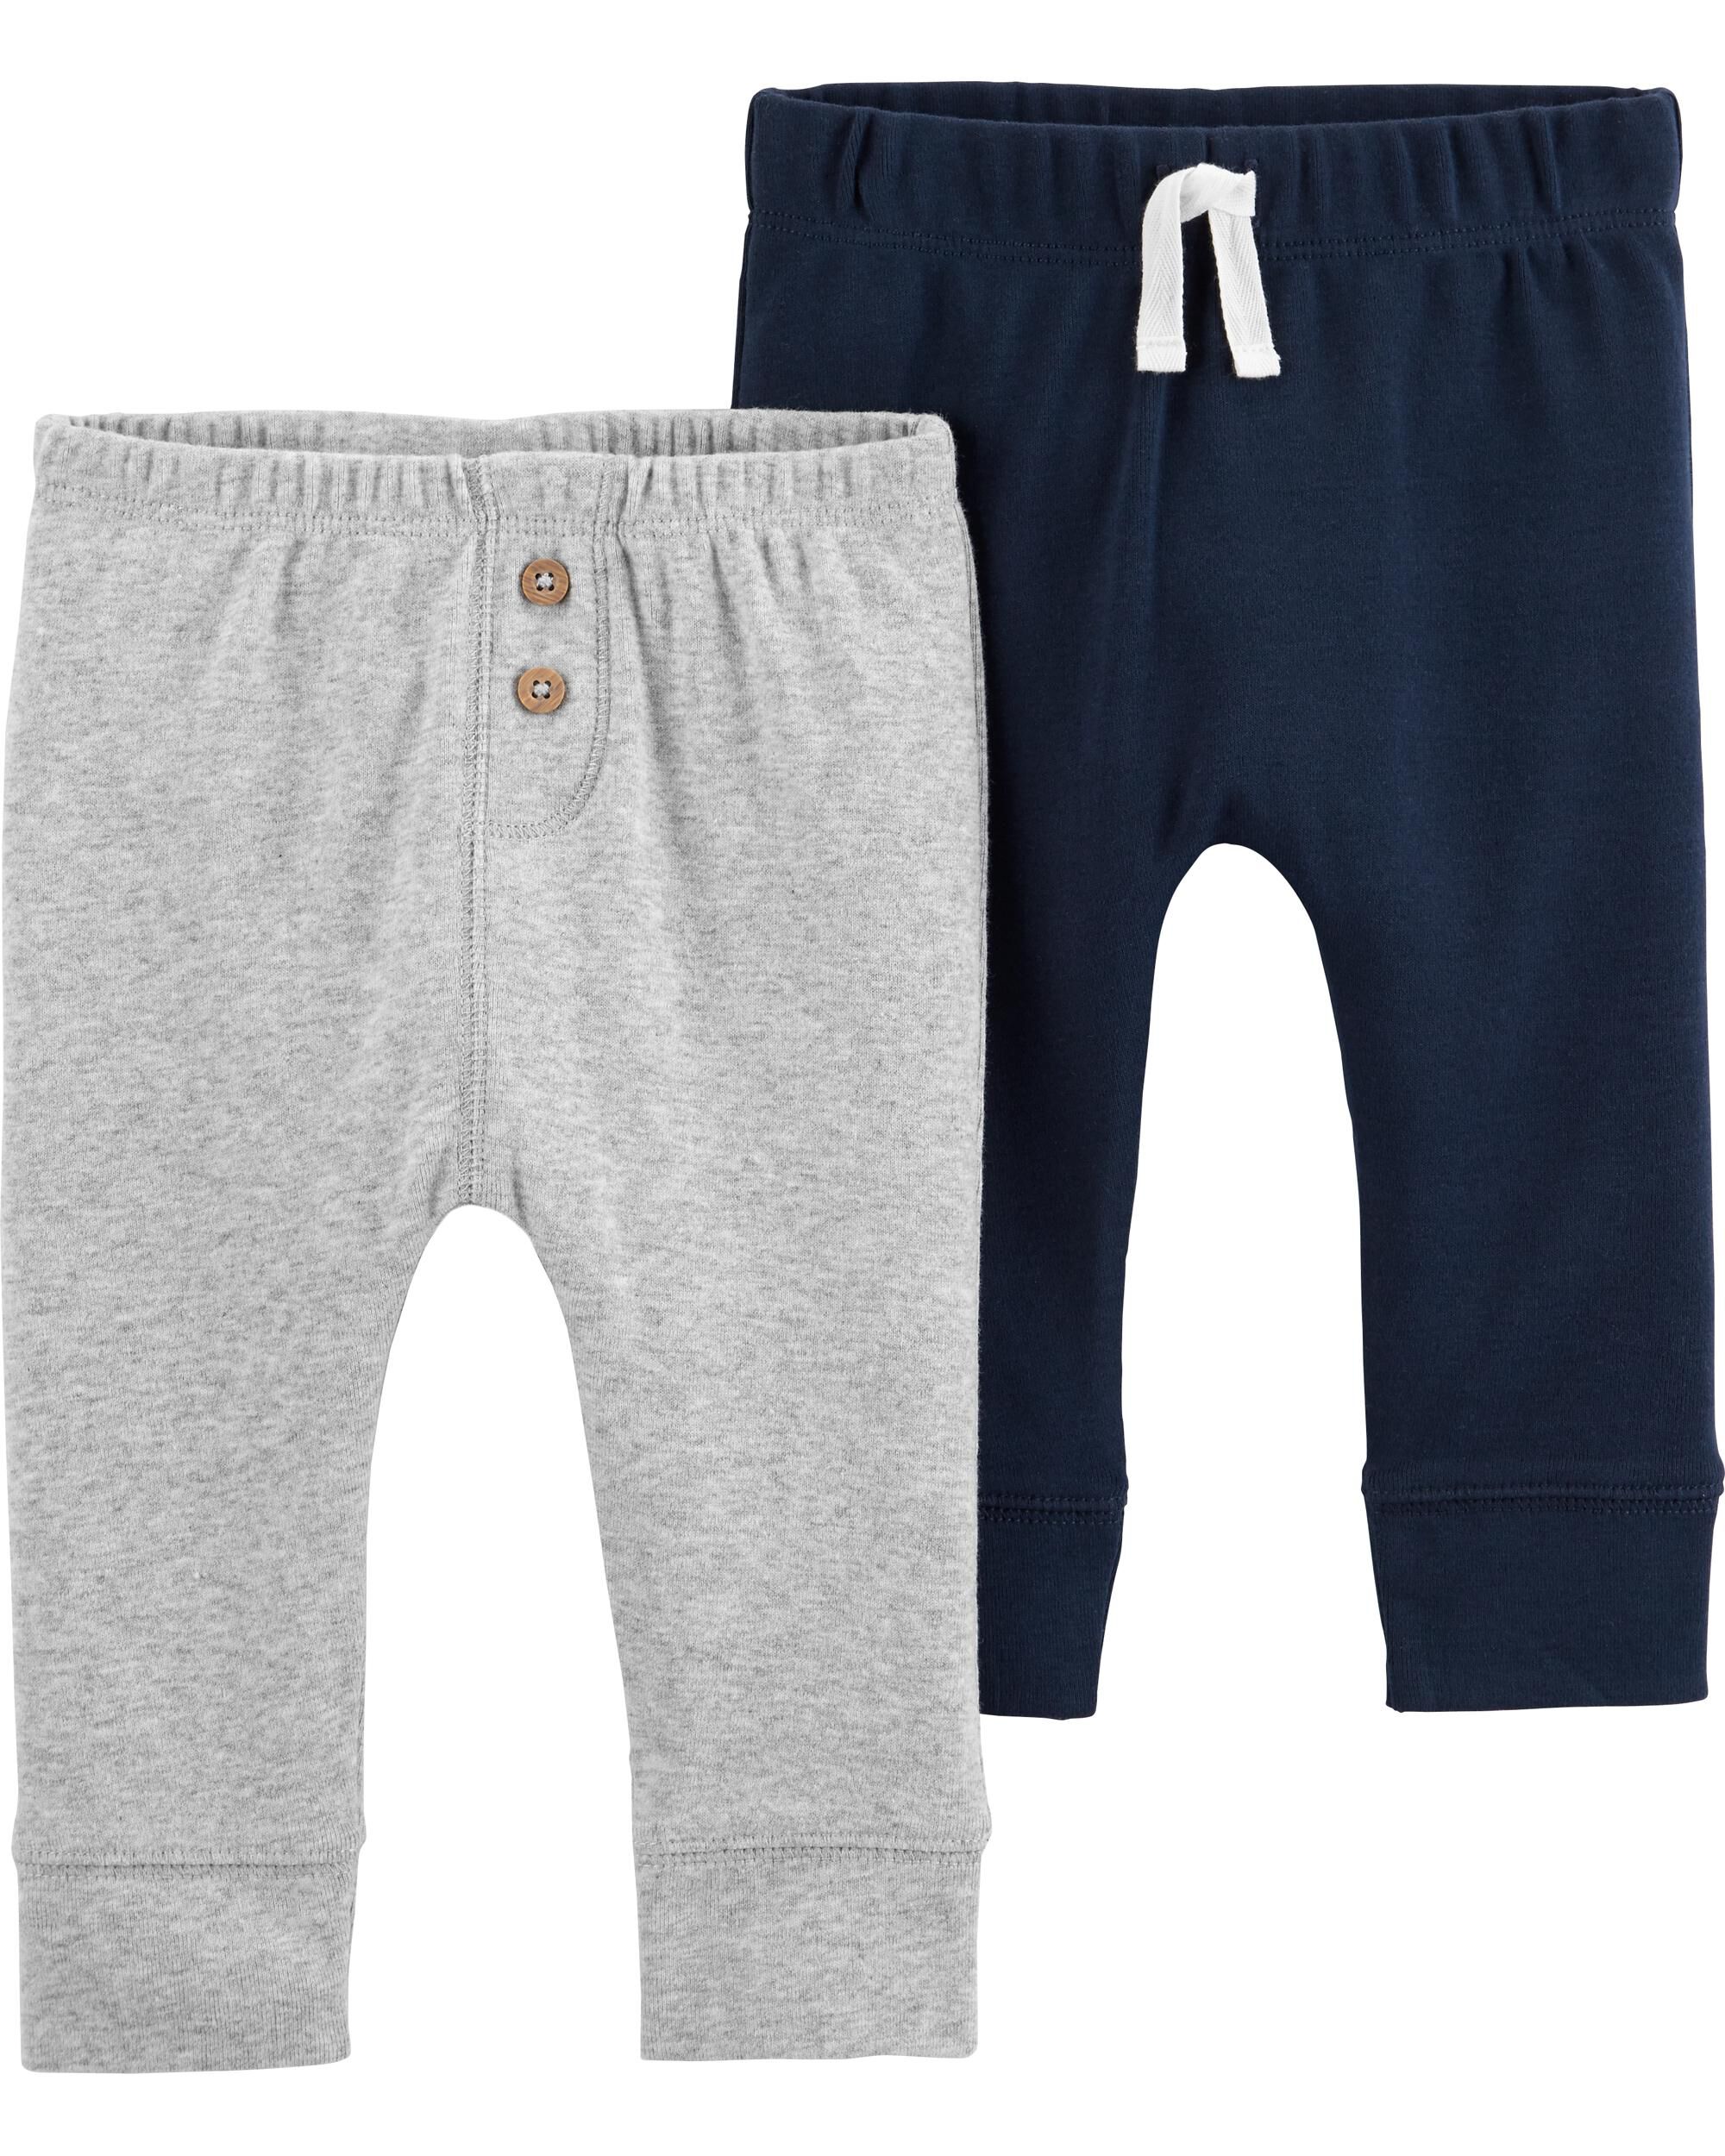 Carters Baby Boys 2-Pack Shorts